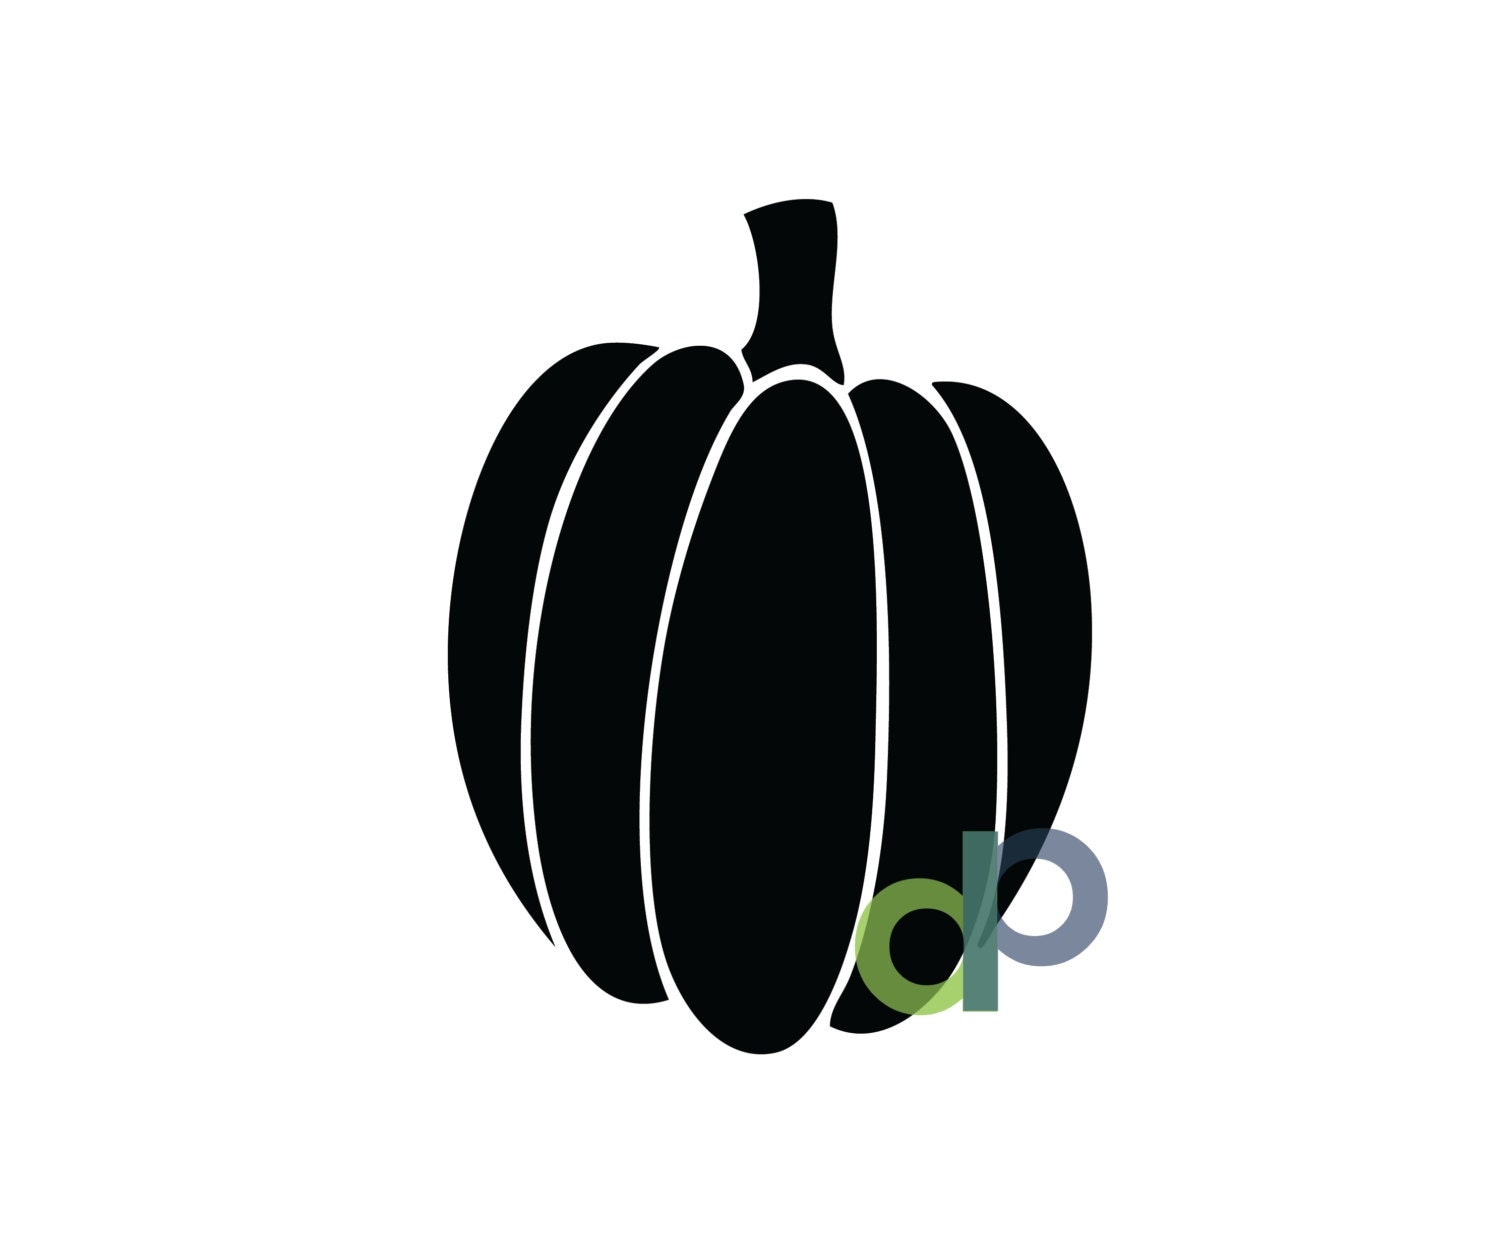 Download Tall Pumpkin-SVG file from PaisleyHomeDesign on Etsy Studio